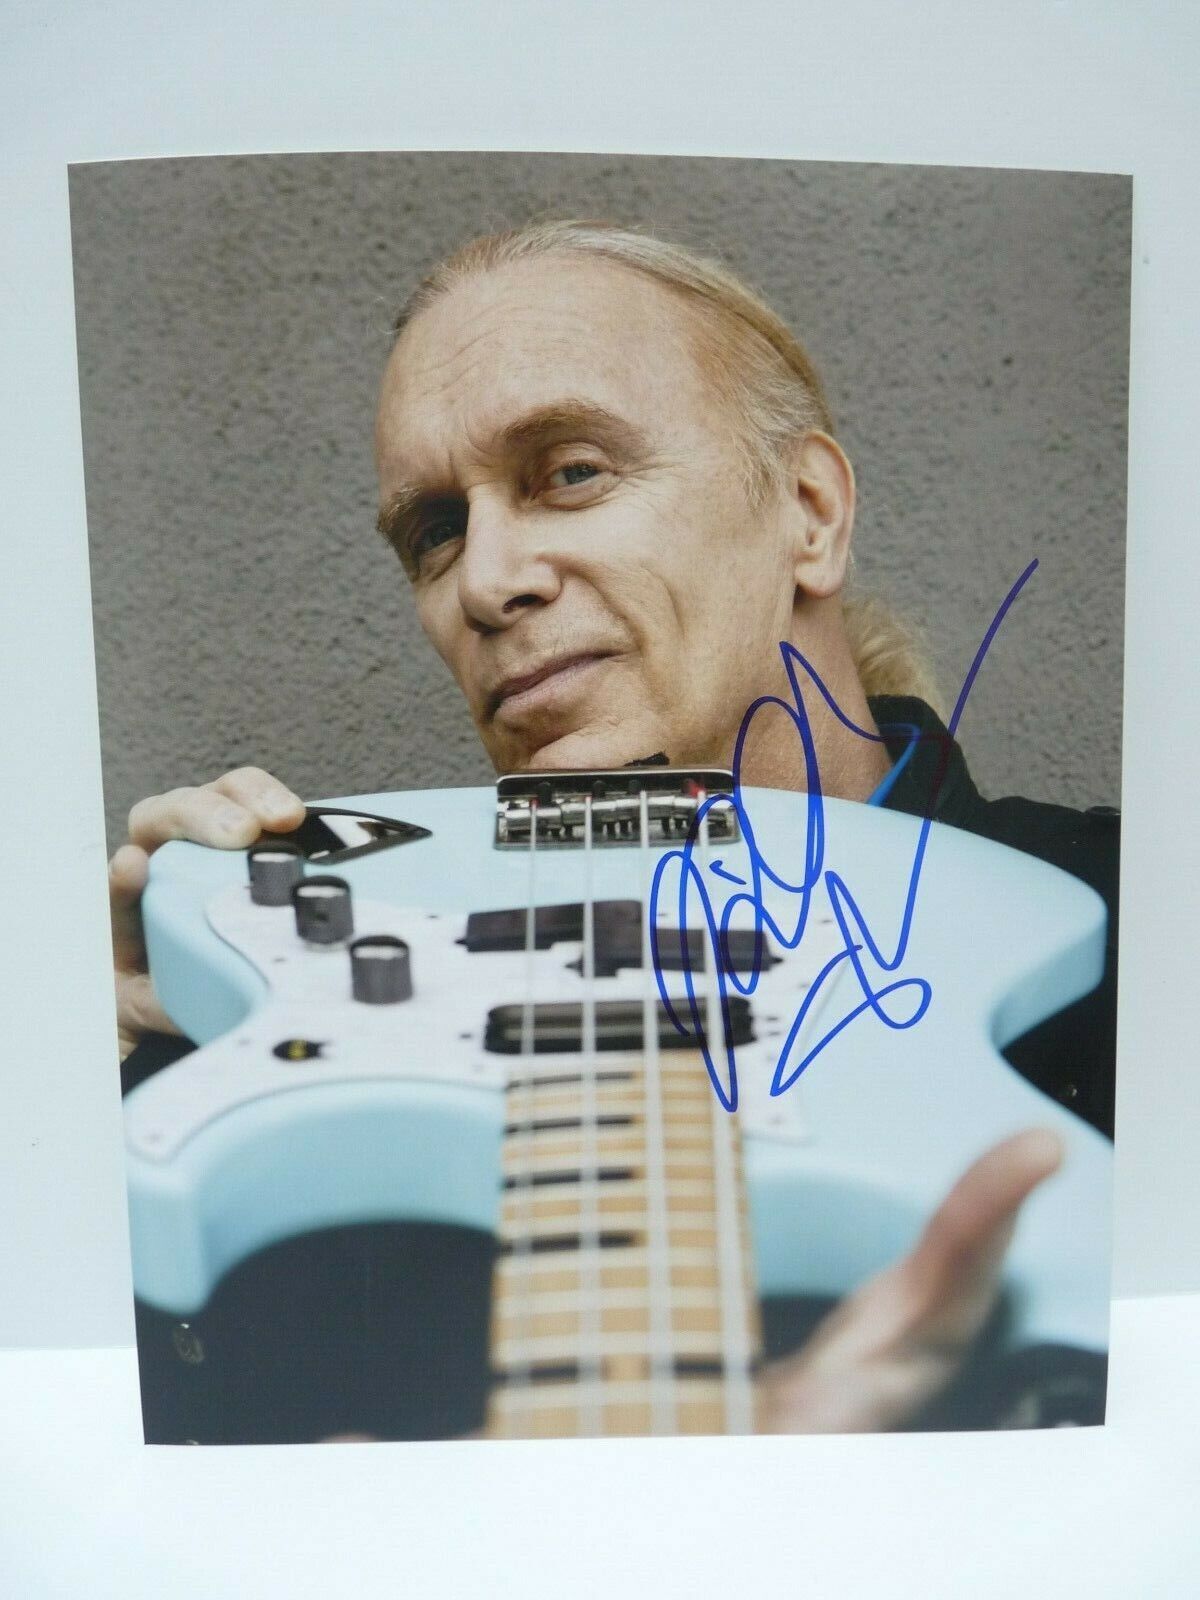 Billy Sheehan DLR Mr Big Autographed Signed 8X10 Photo Poster painting PSA BAS Guaranteed #4